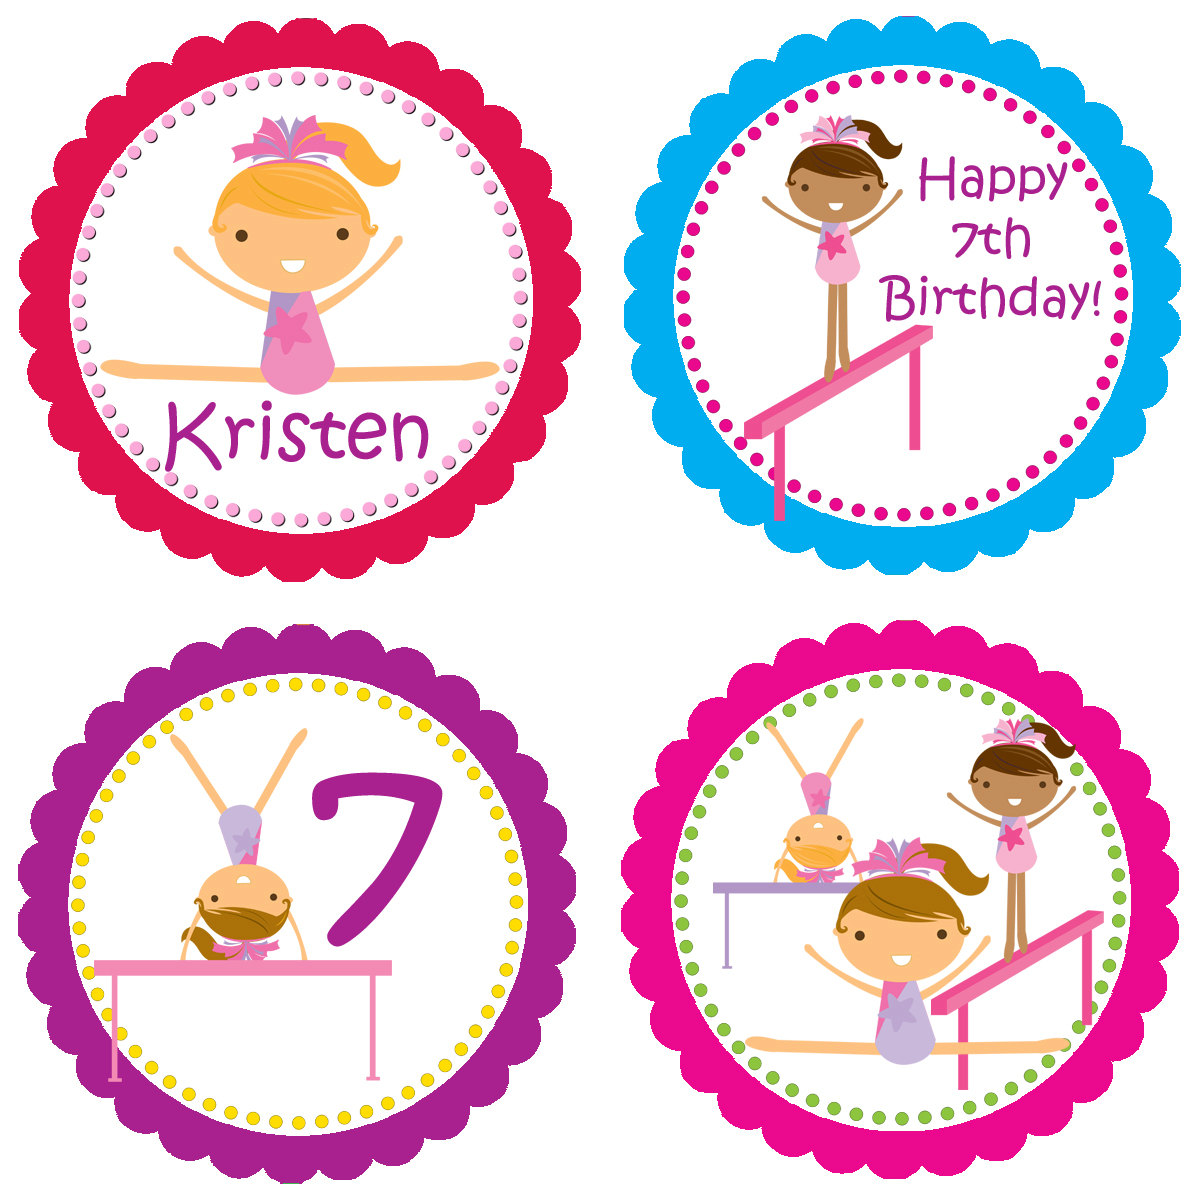 Free Images Of Gymnasts, Download Free Clip Art, Free Clip